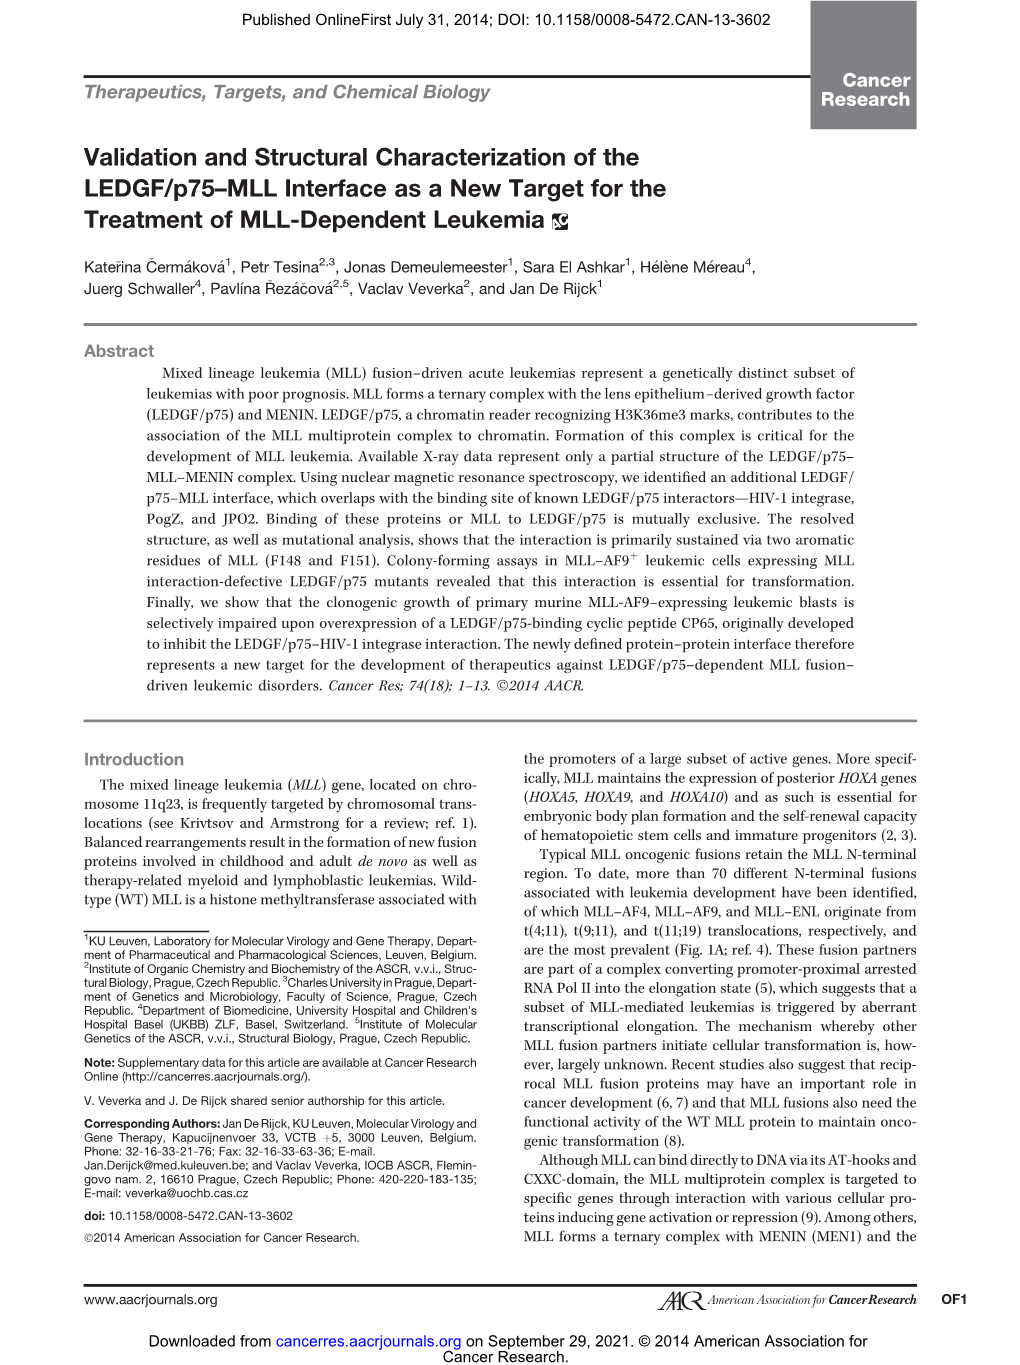 Validation and Structural Characterization of the LEDGF/P75–MLL Interface As a New Target for the Treatment of MLL-Dependent Leukemia